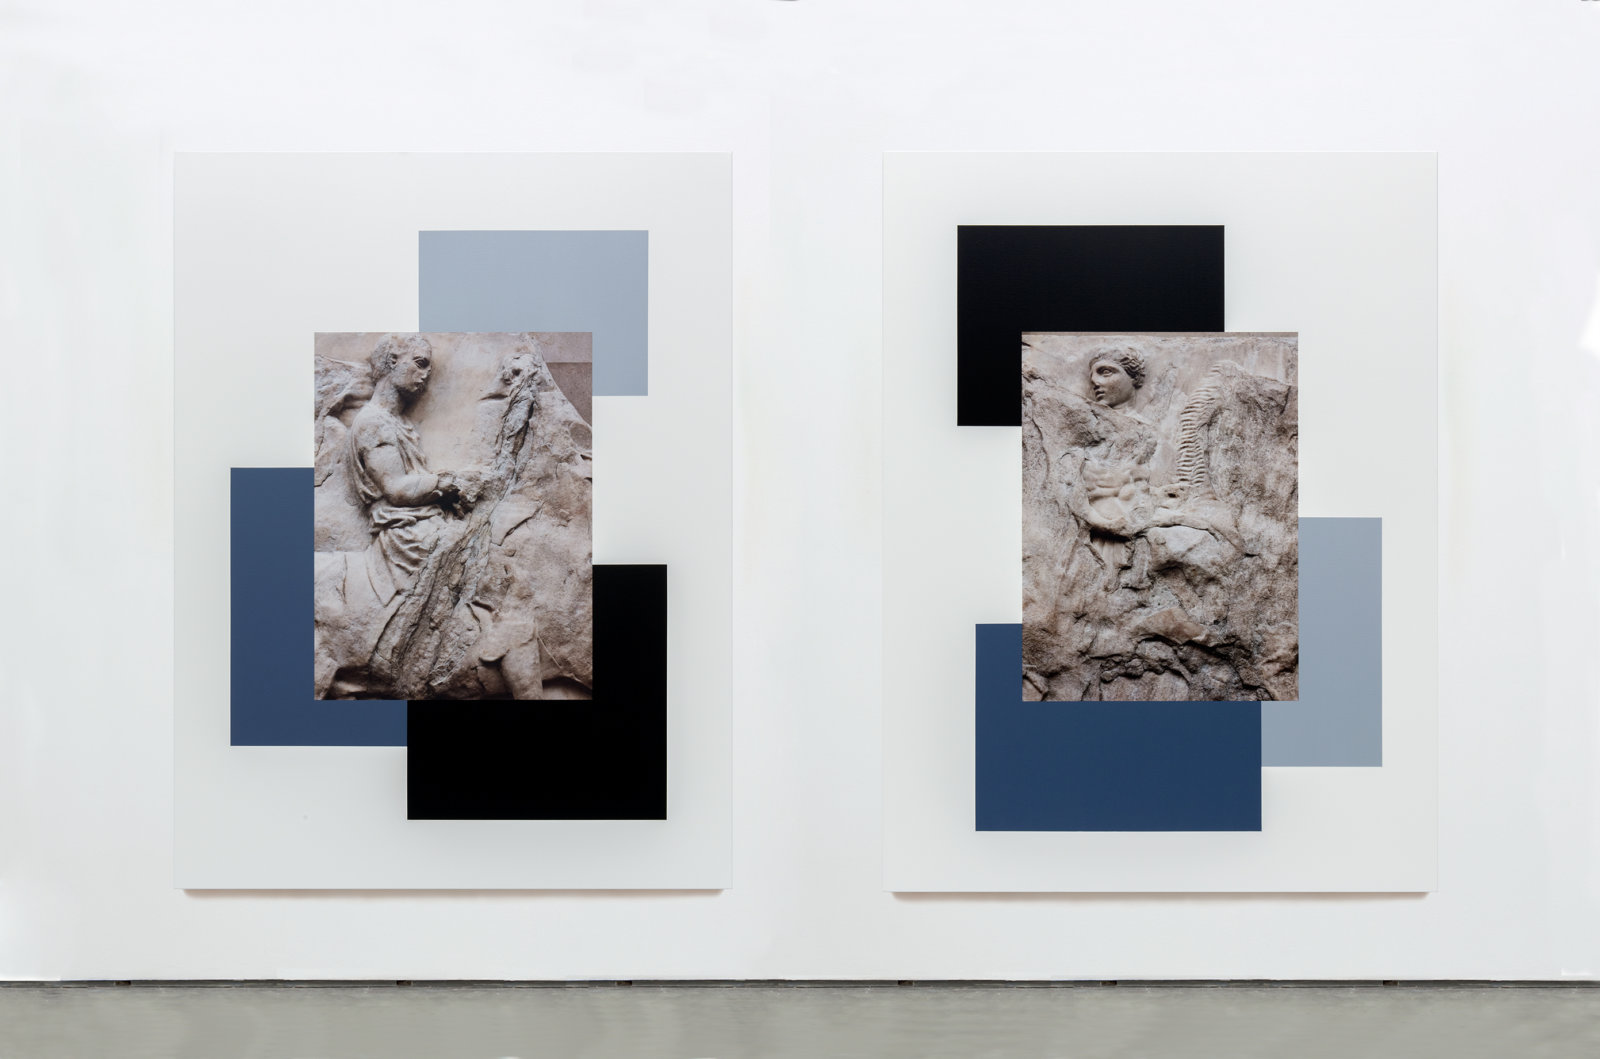 Ian Wallace, The Riders of the Parthenon Frieze I &amp; II, 2013, diptych, photolaminate and acrylic on canvas, each 80 x 60 in. (203 x 153 cm)